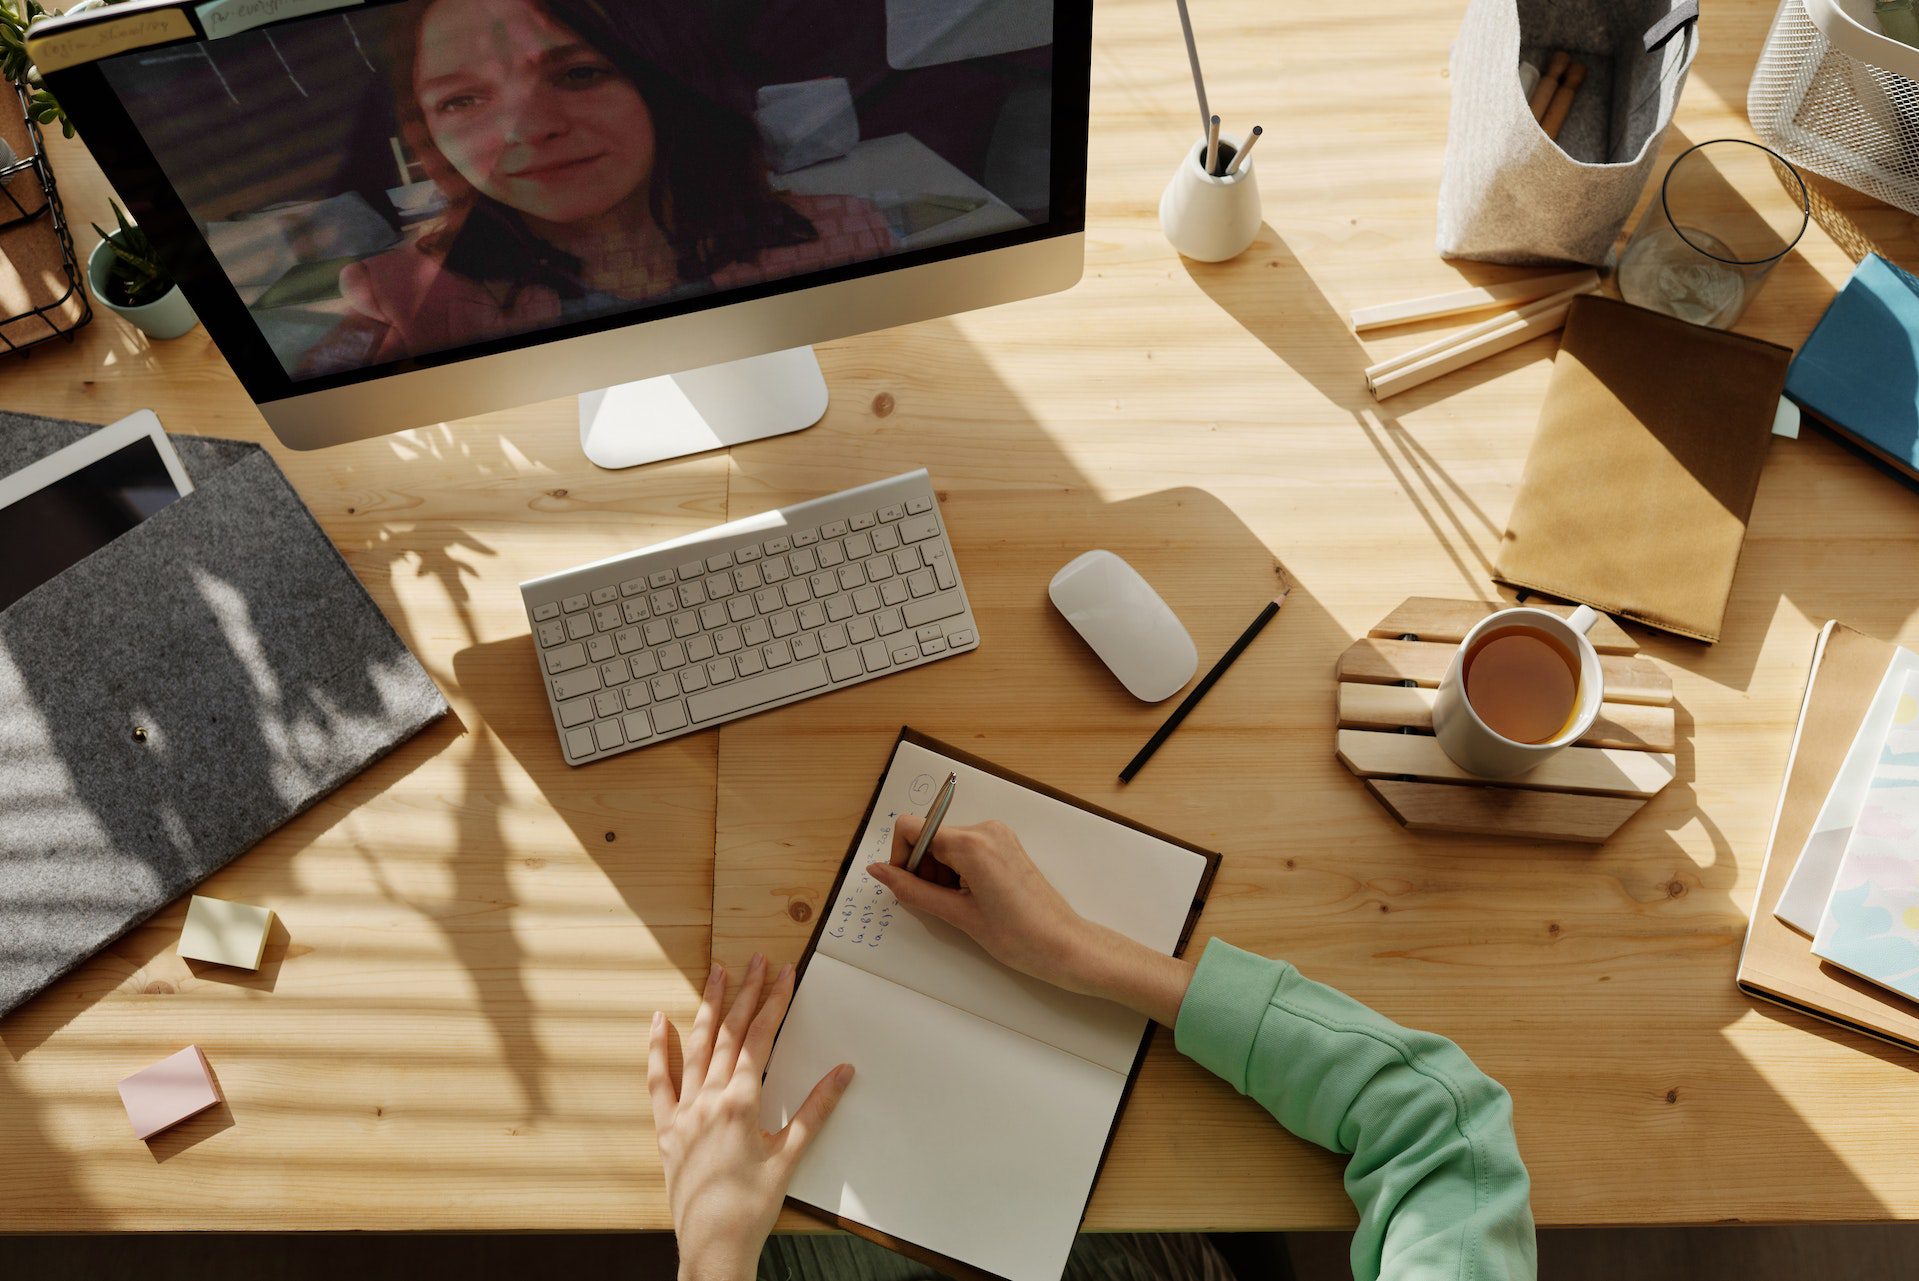 image of someone writing notes by hand while talking to someone on video conferencing on an imac